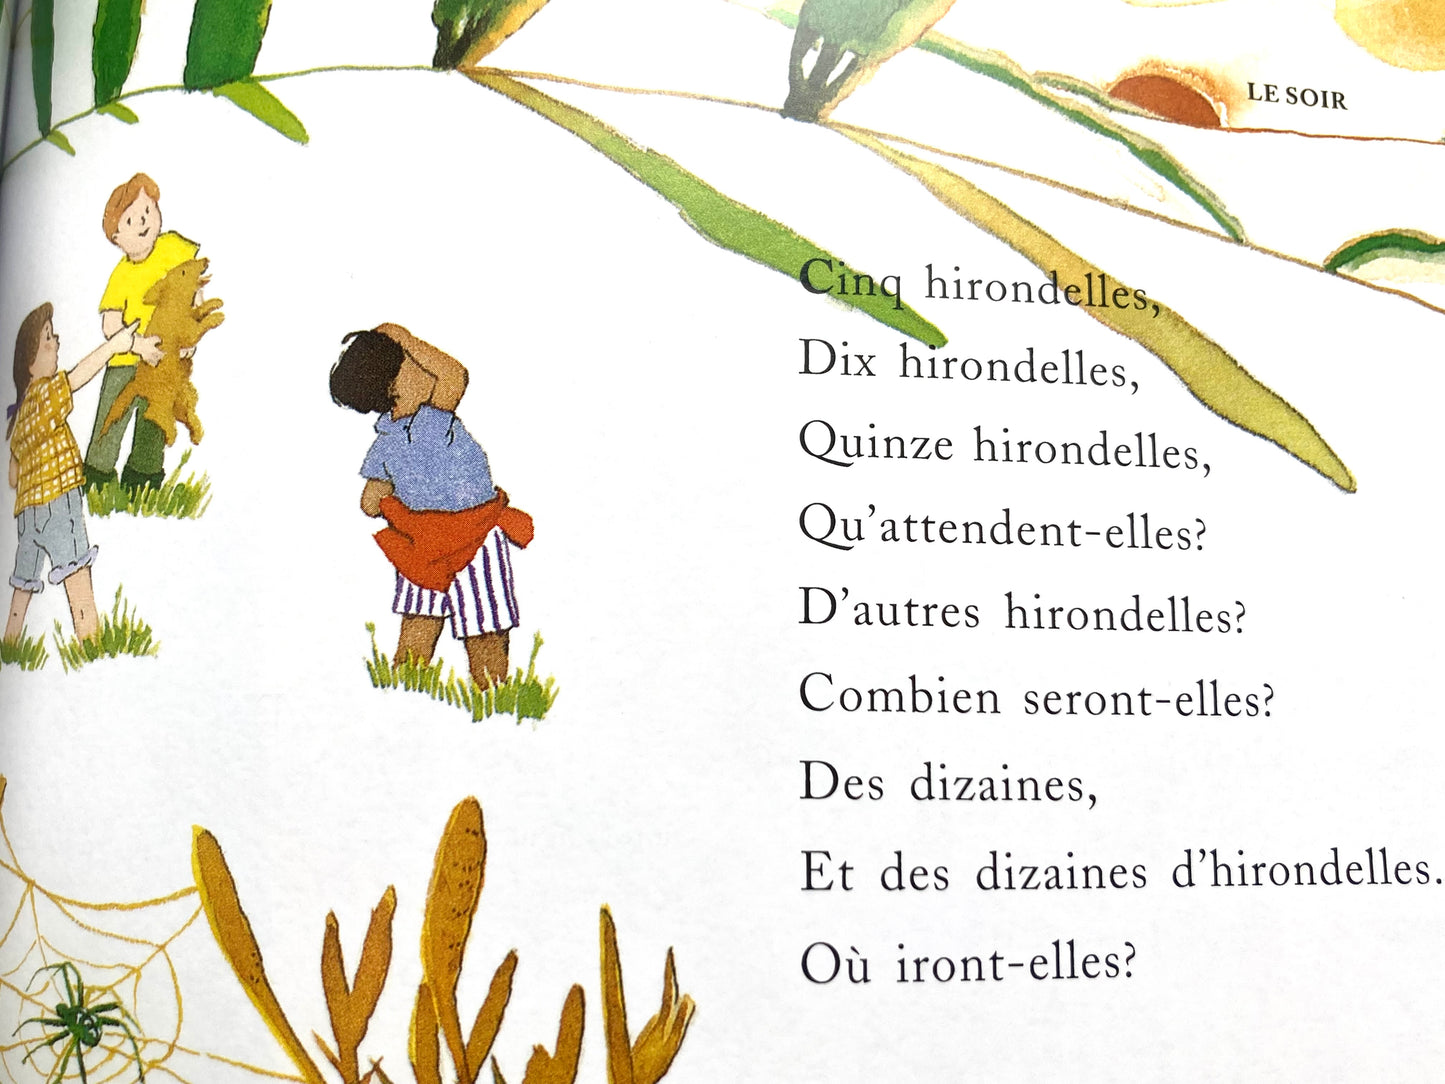 Children's Picture Book - "UN DEUX TROIS", Nursery Rhymes...in French!